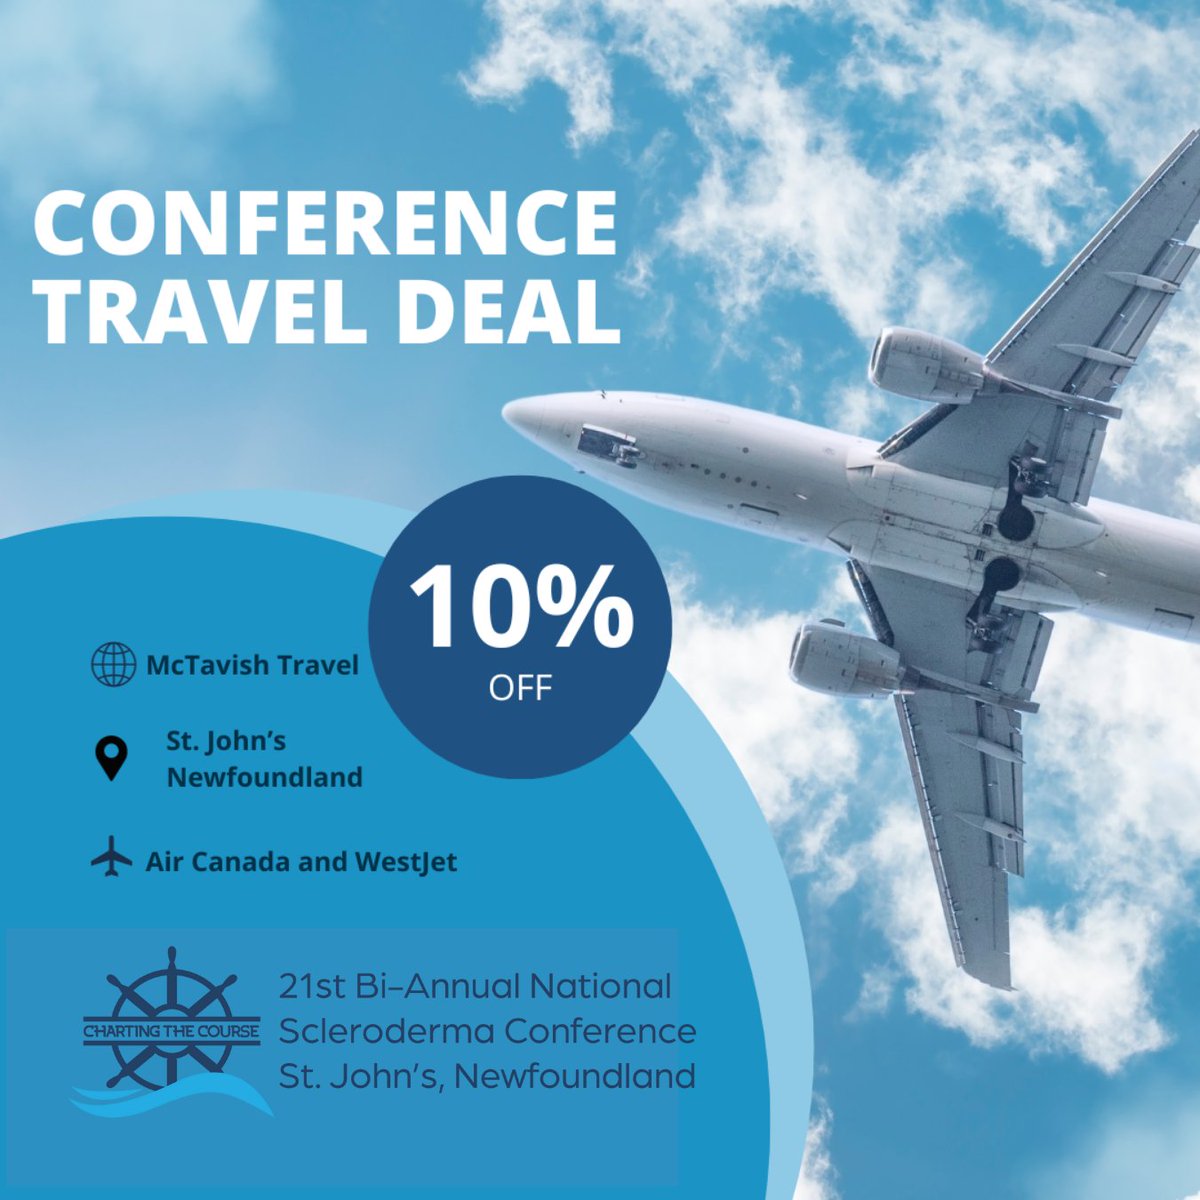 Be part of something extraordinary and join us at the National Scleroderma Conference in St. John's, NL this August. We've partnered with McTavish Travel to offer an exclusive discount for Air Canada + WestJet Flights. Call Cathy: 905-465-4323 or email cathyf@mctavish.com